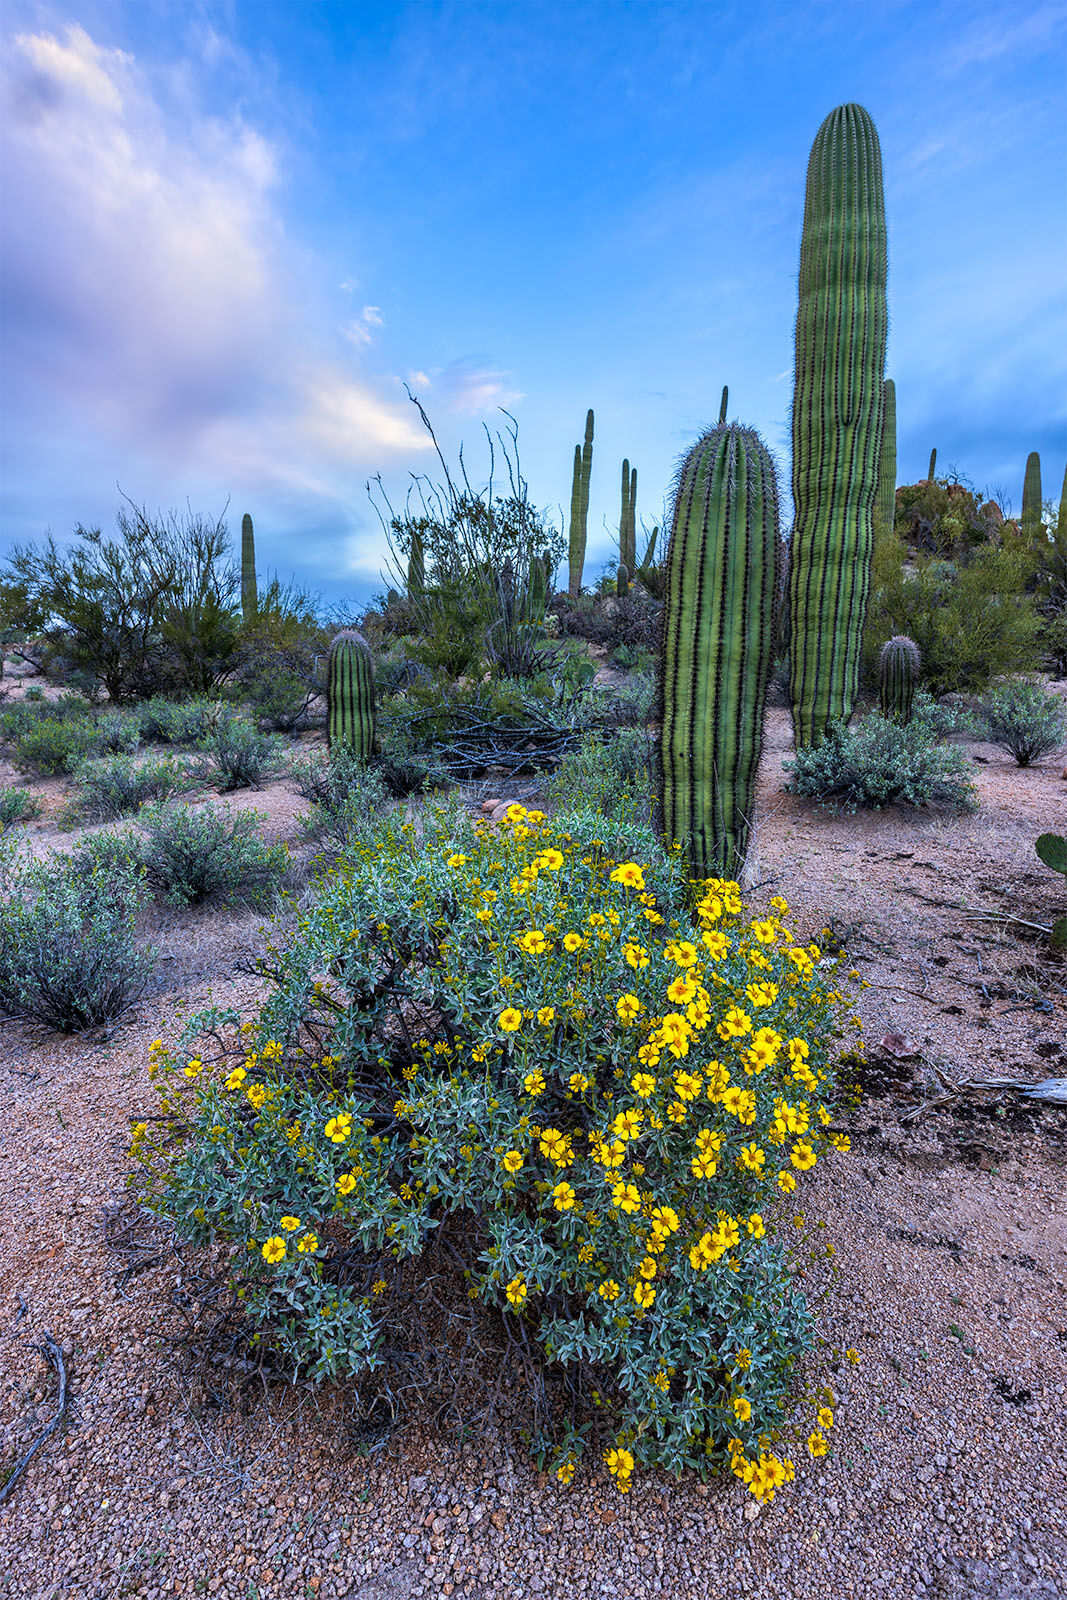 a brittlebush is blooming in the desert with saguaro cactus in the background. Image taken within Saguaro National Park.